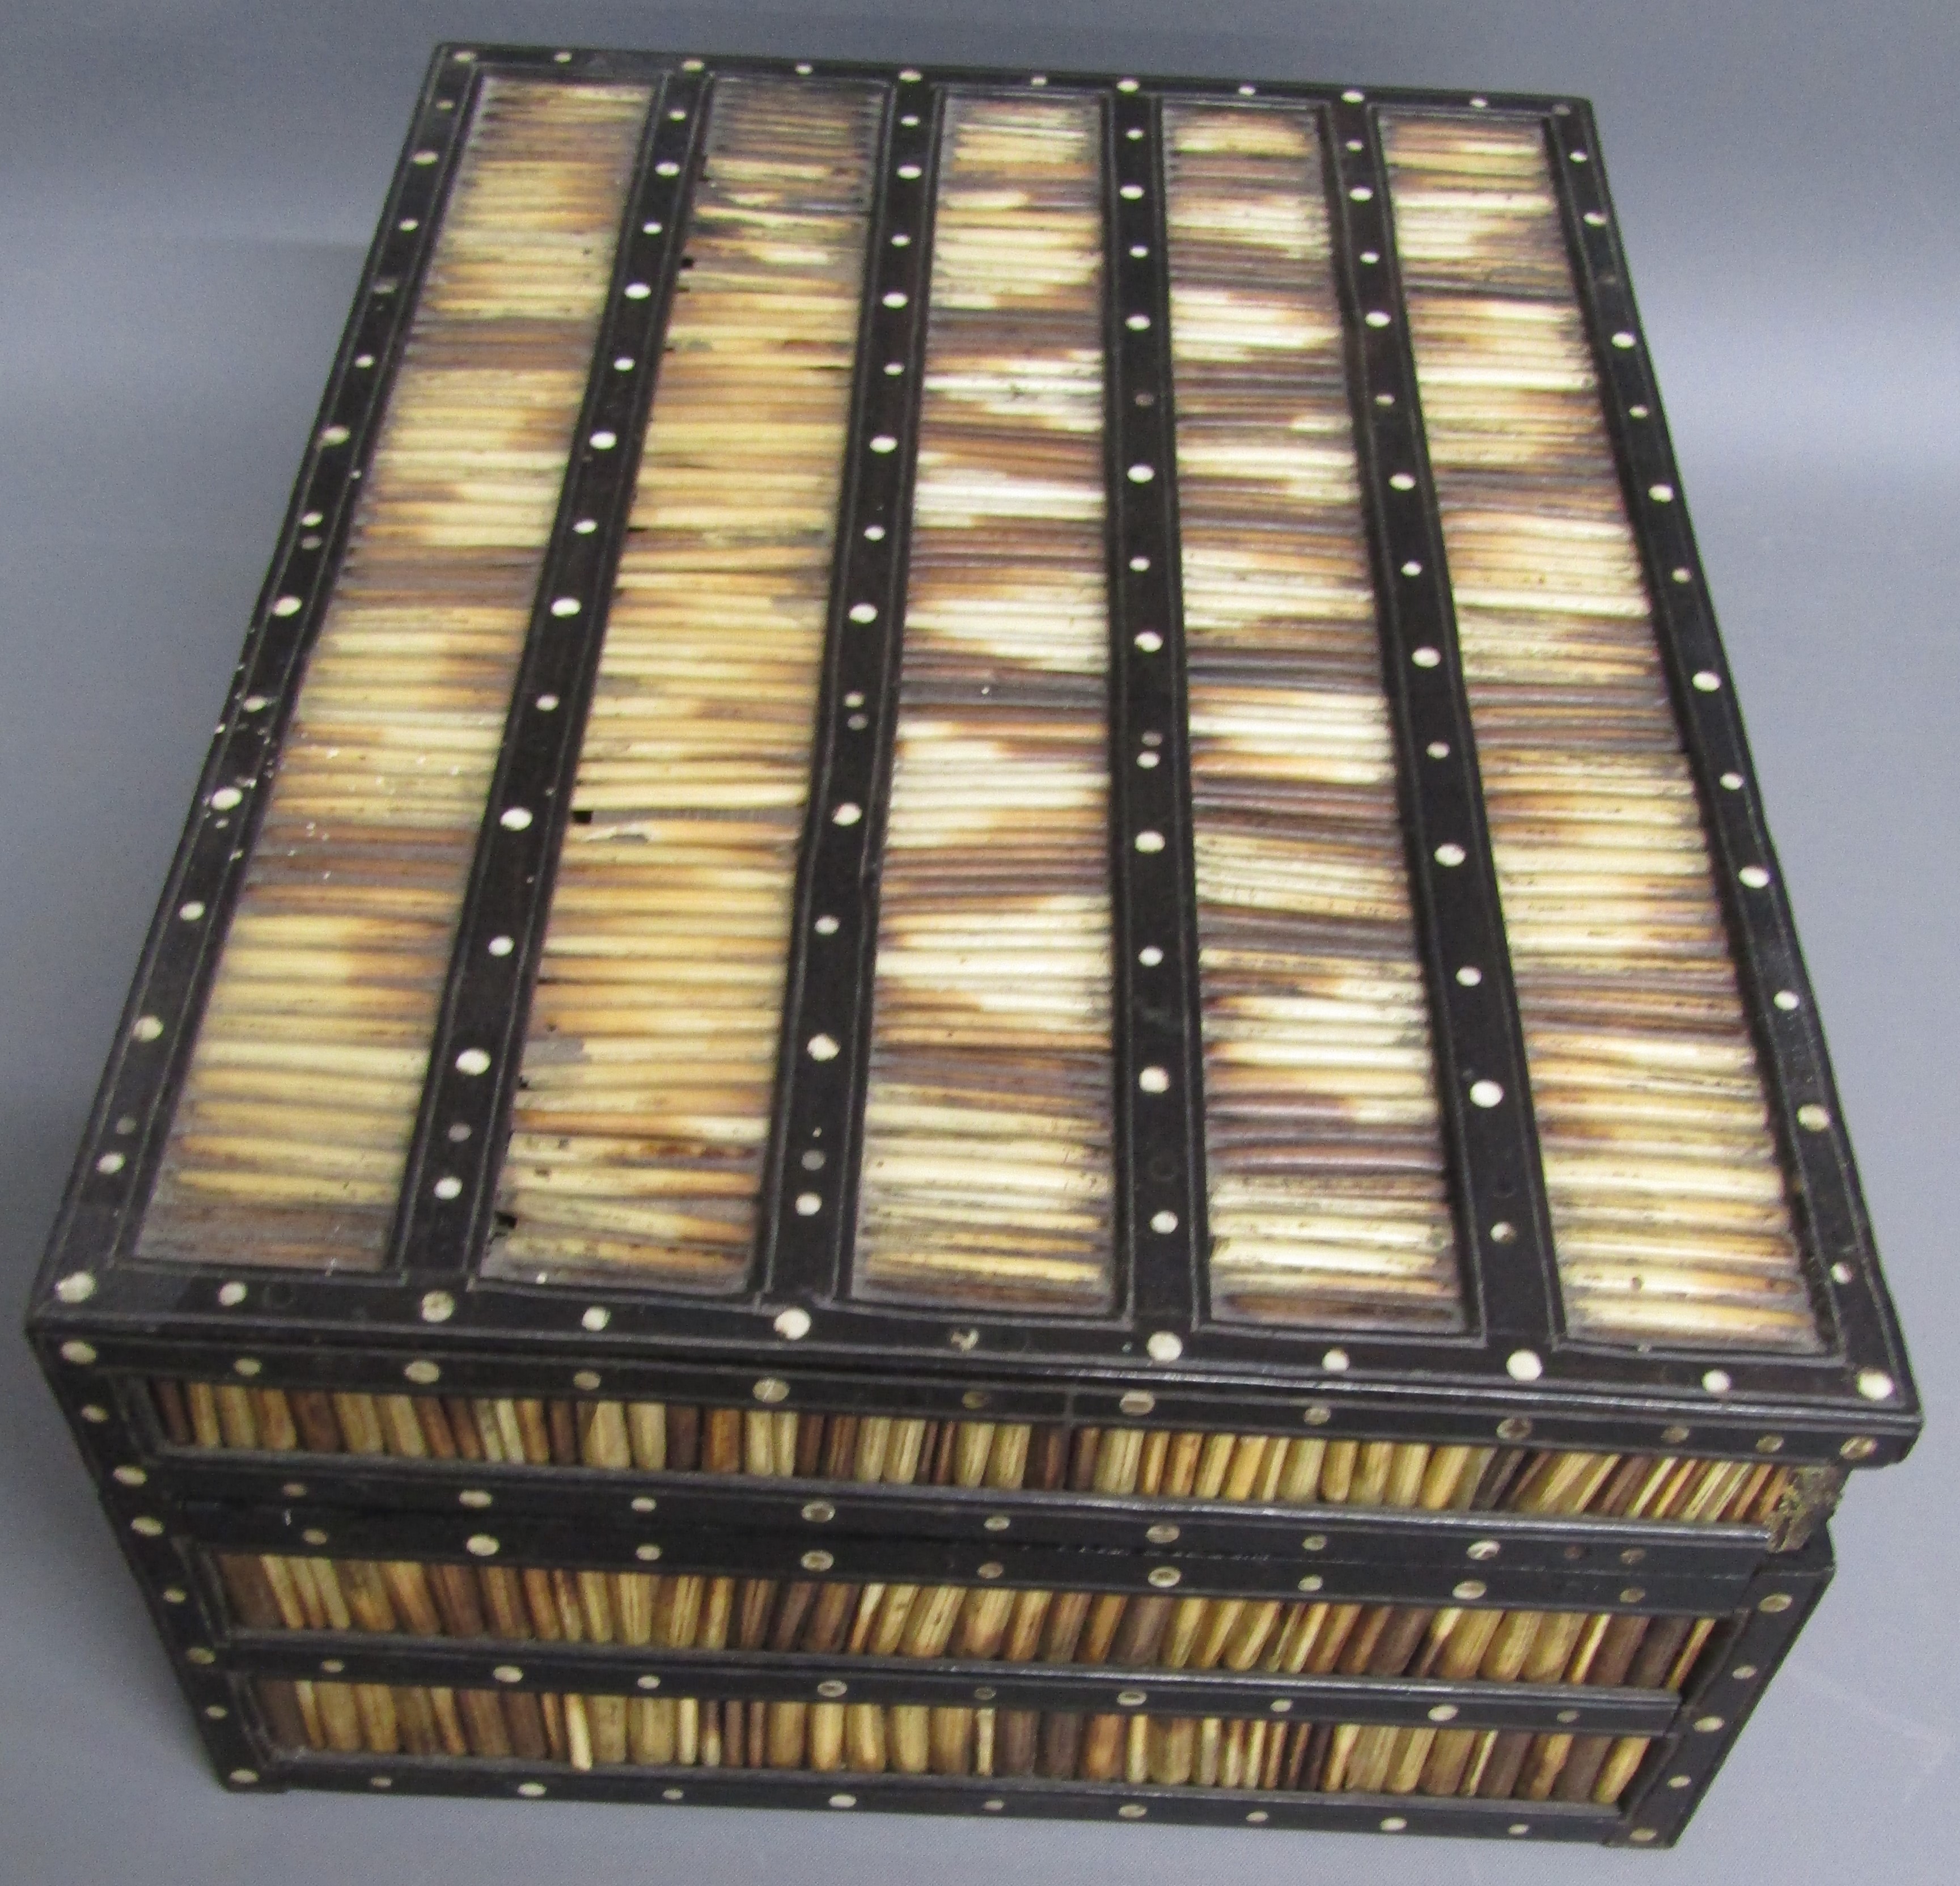 Porcupine quill box containing buttons - approx. 27cm x 19.5cm x 10cm - Image 10 of 10